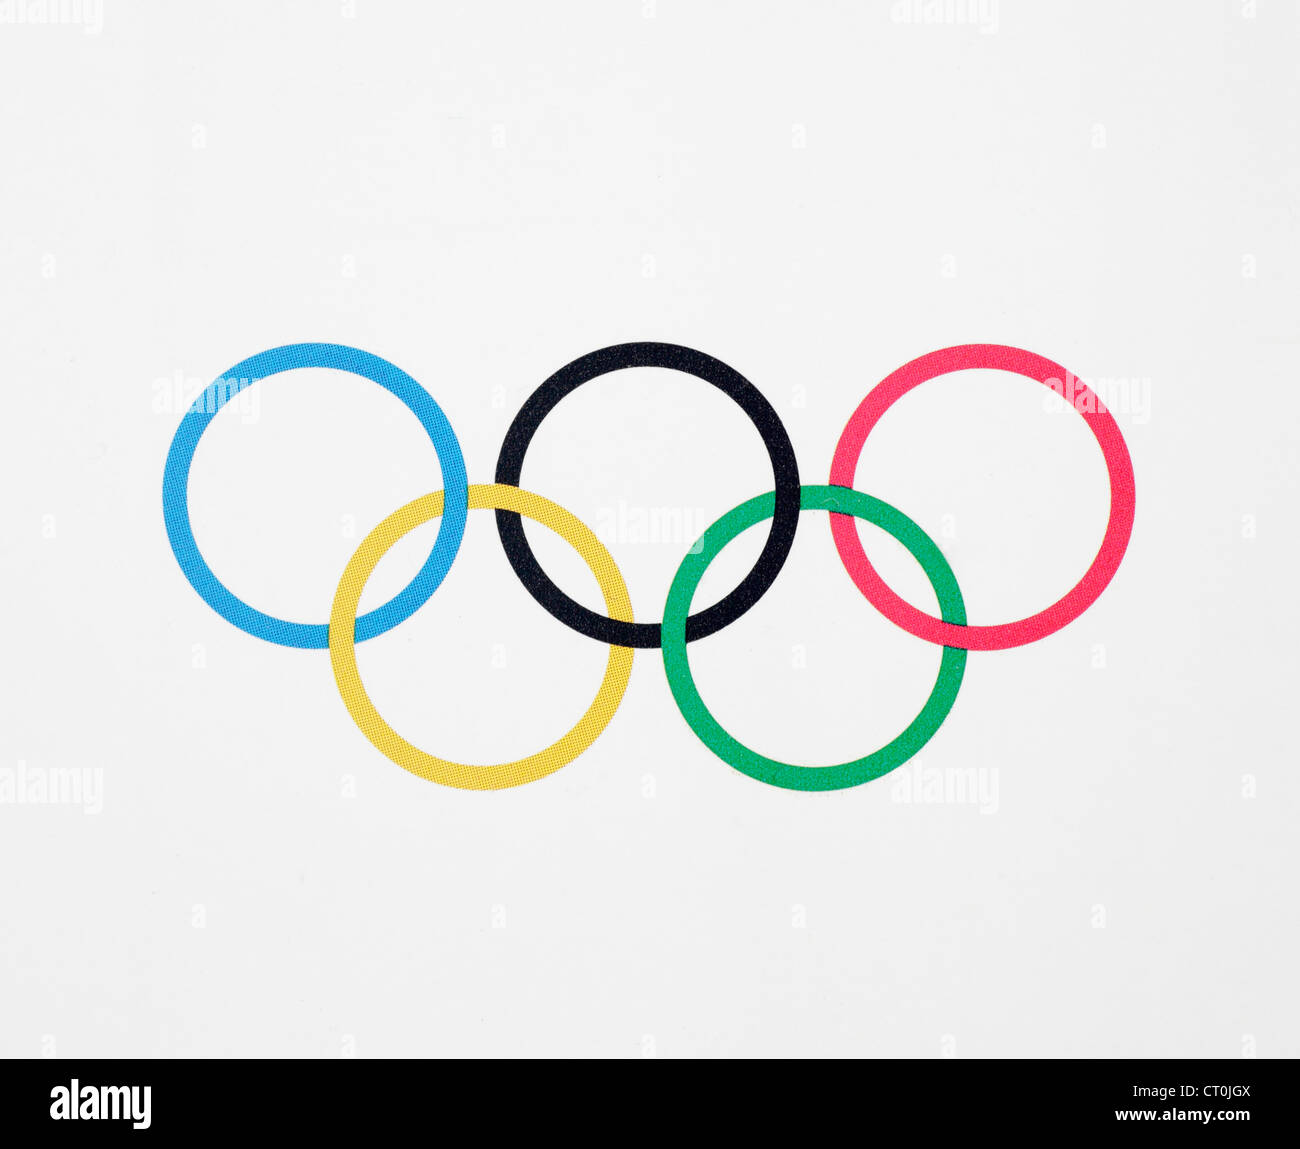 File:Olympic rings without rims.svg - Wikipedia